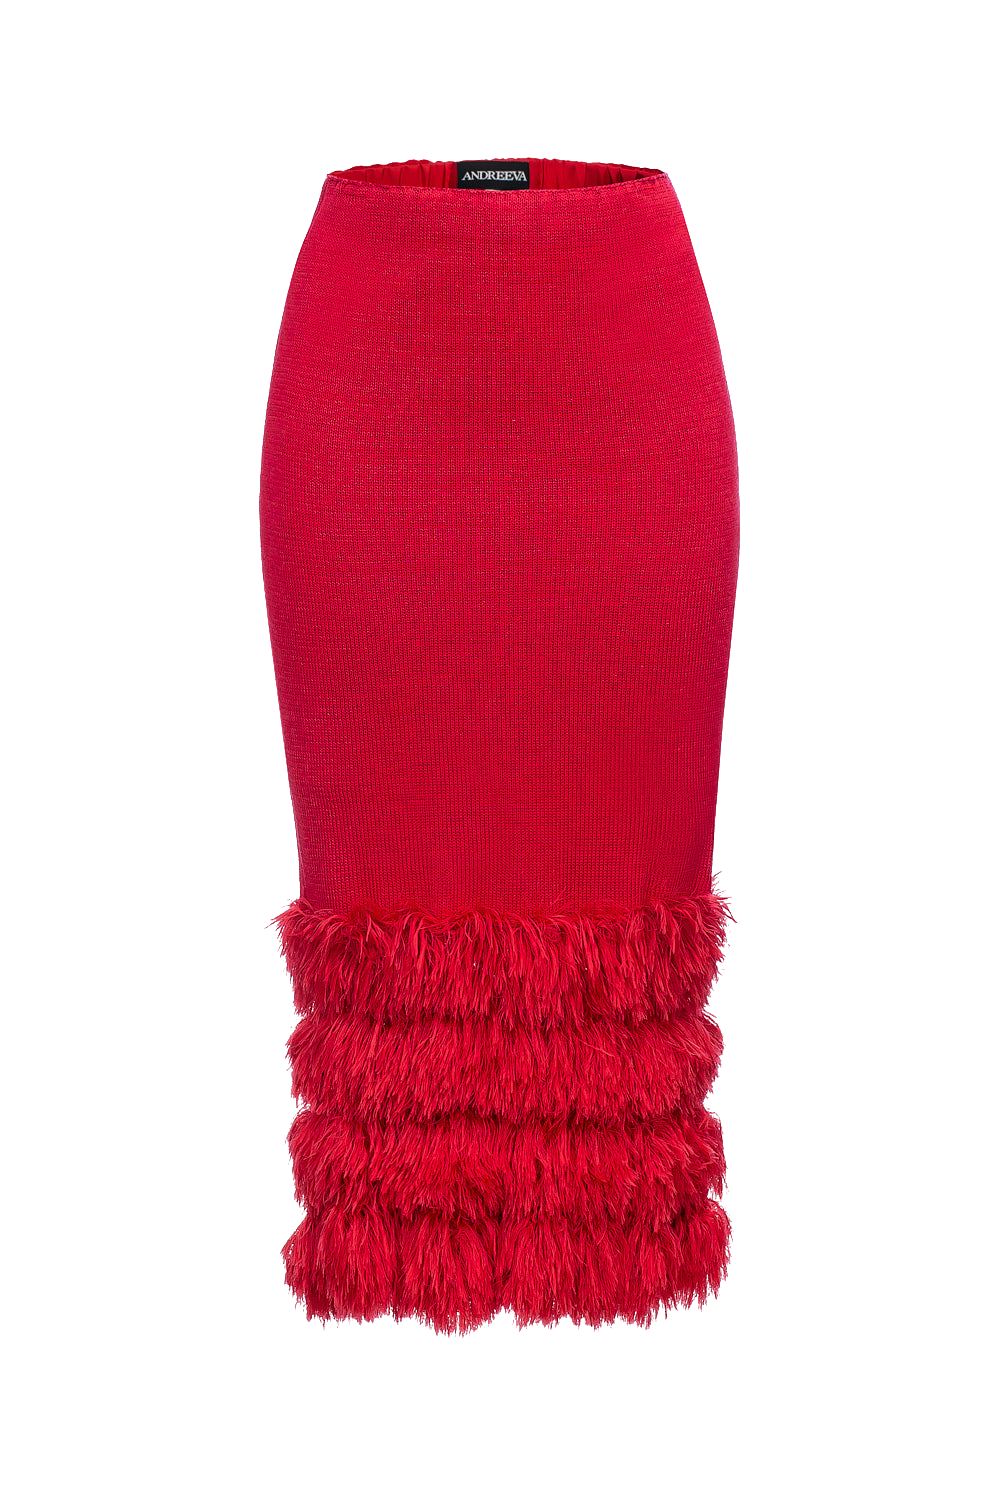 Andreeva Red Knit Skirt With Handmade Knit Details